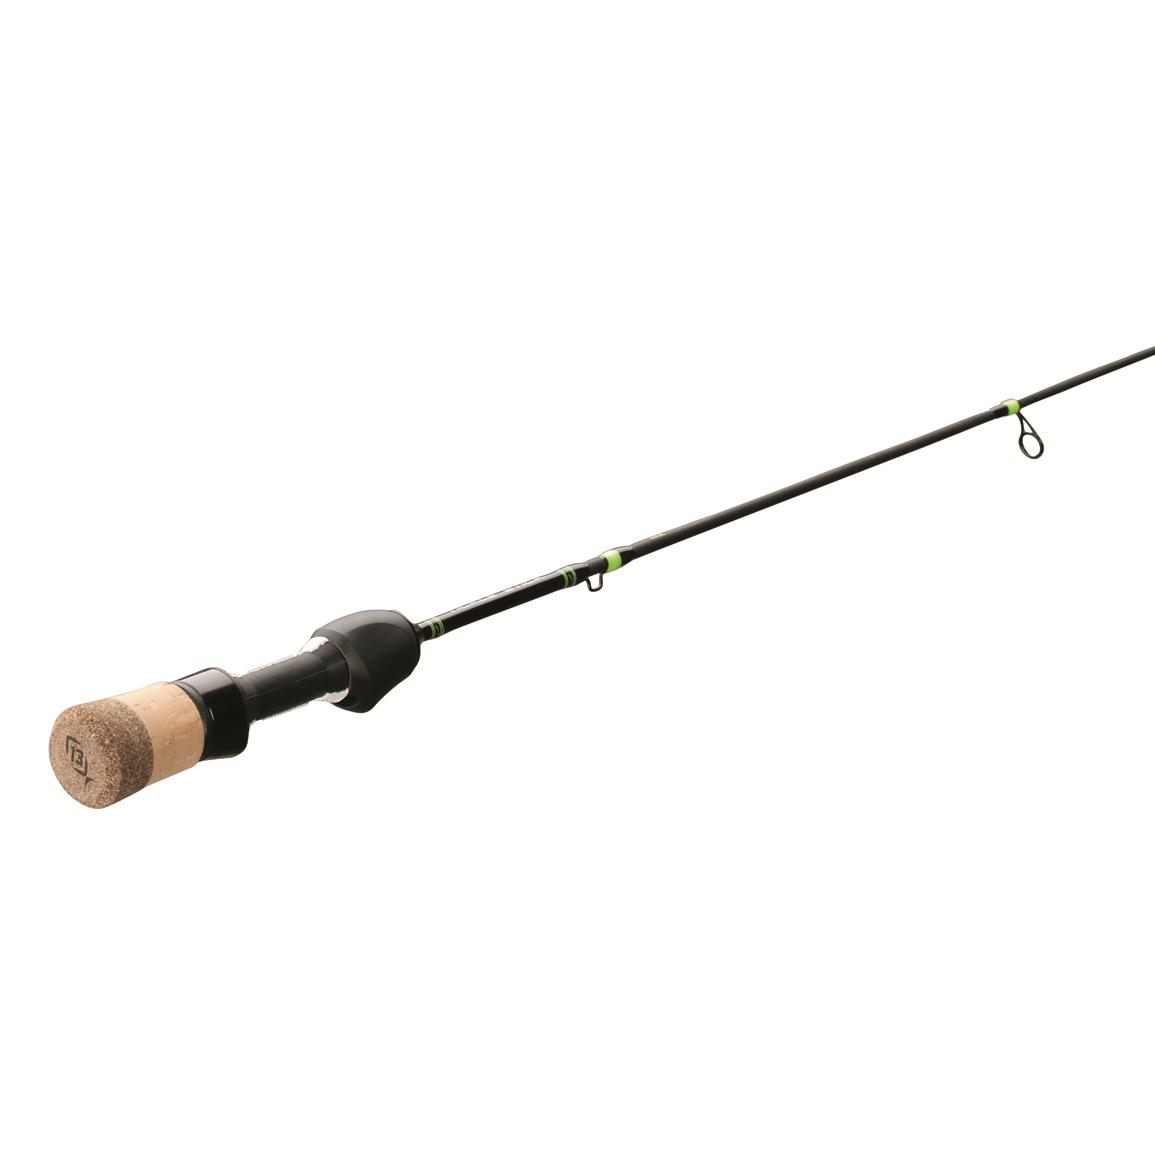 13 Fishing Wicked Pro Ice Fishing Rods - 735081, Ice Fishing Rods